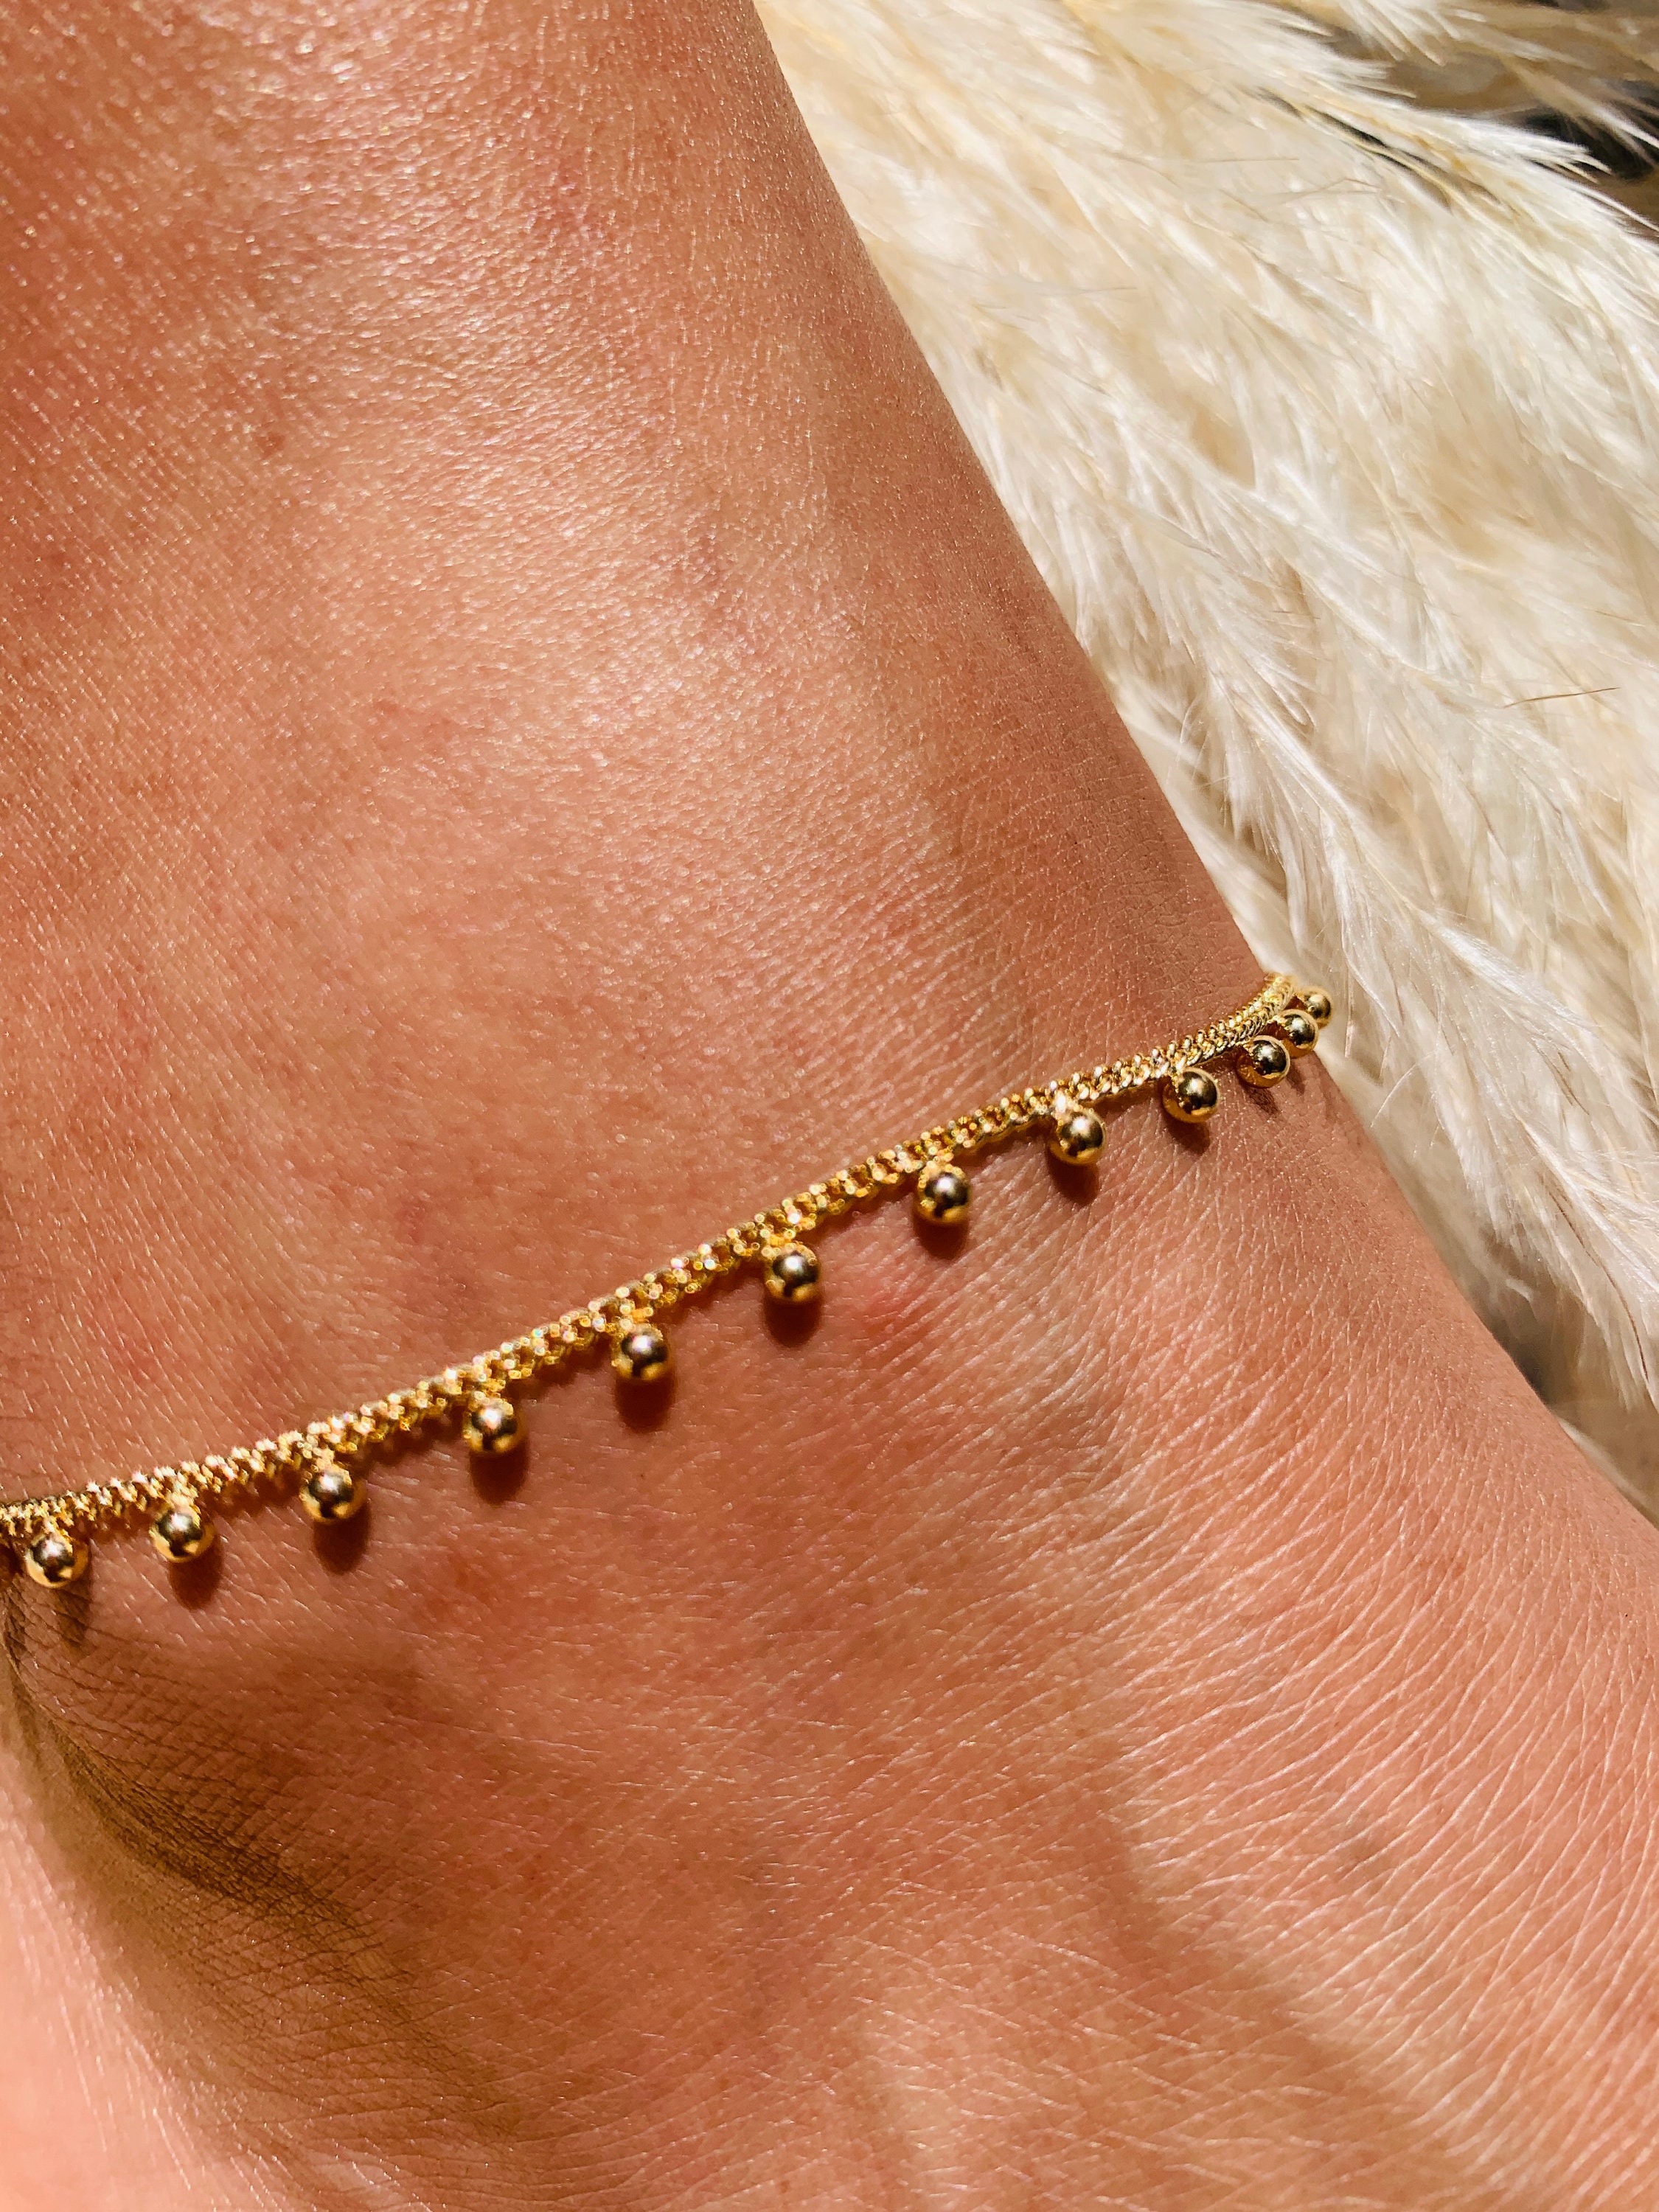 Women Gold Chain Anklet Bracelet : Stylish 18K Gold Plated Stainless Steel  Minimalist Boho Style Layered Dainty Ankle Bracelet for her, Summer Jewelry